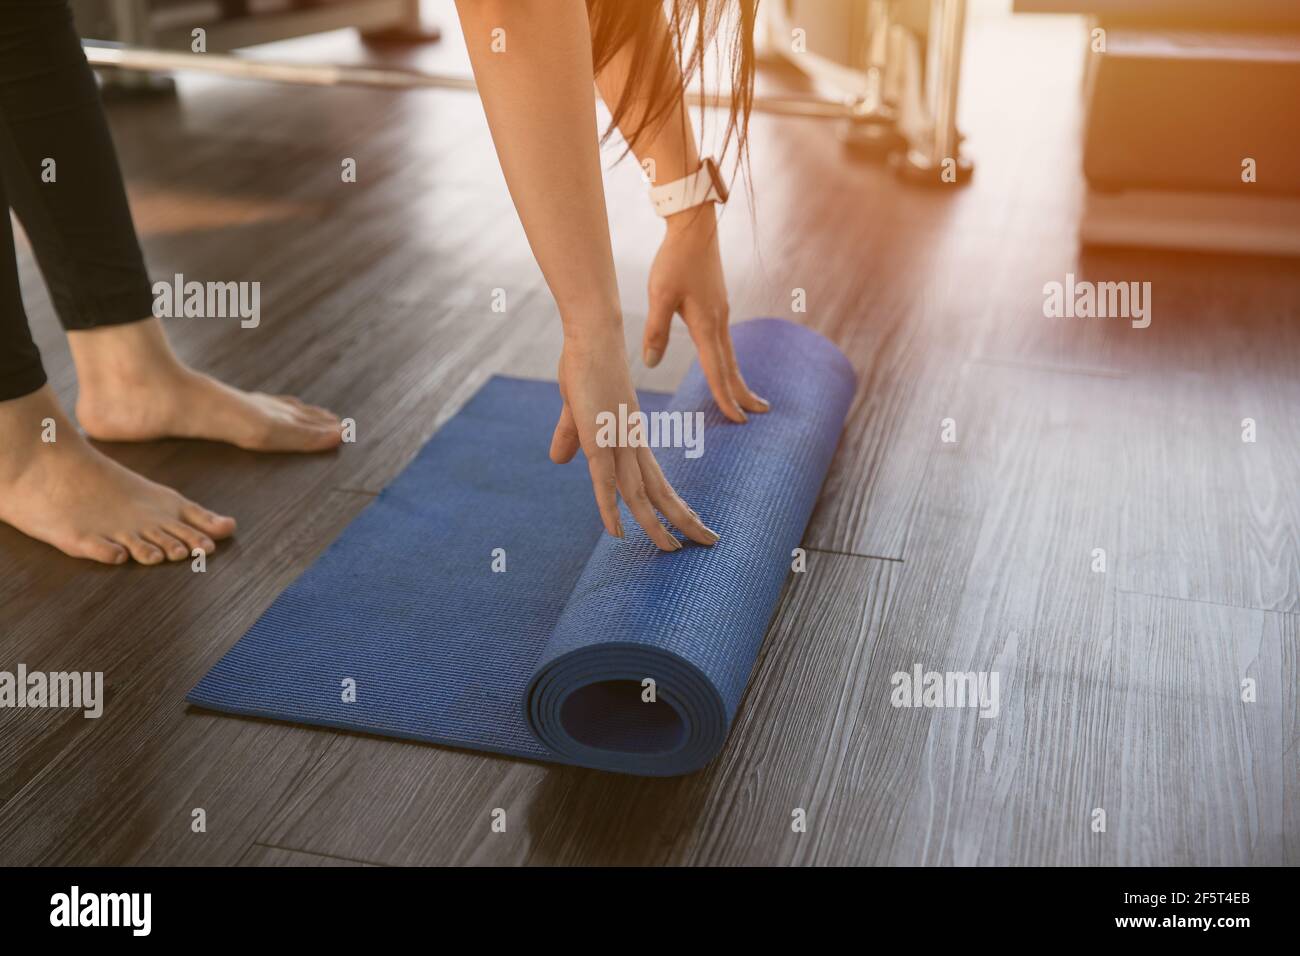 Healthy woman rolling preparing yoga mat for fitness class Stock Photo